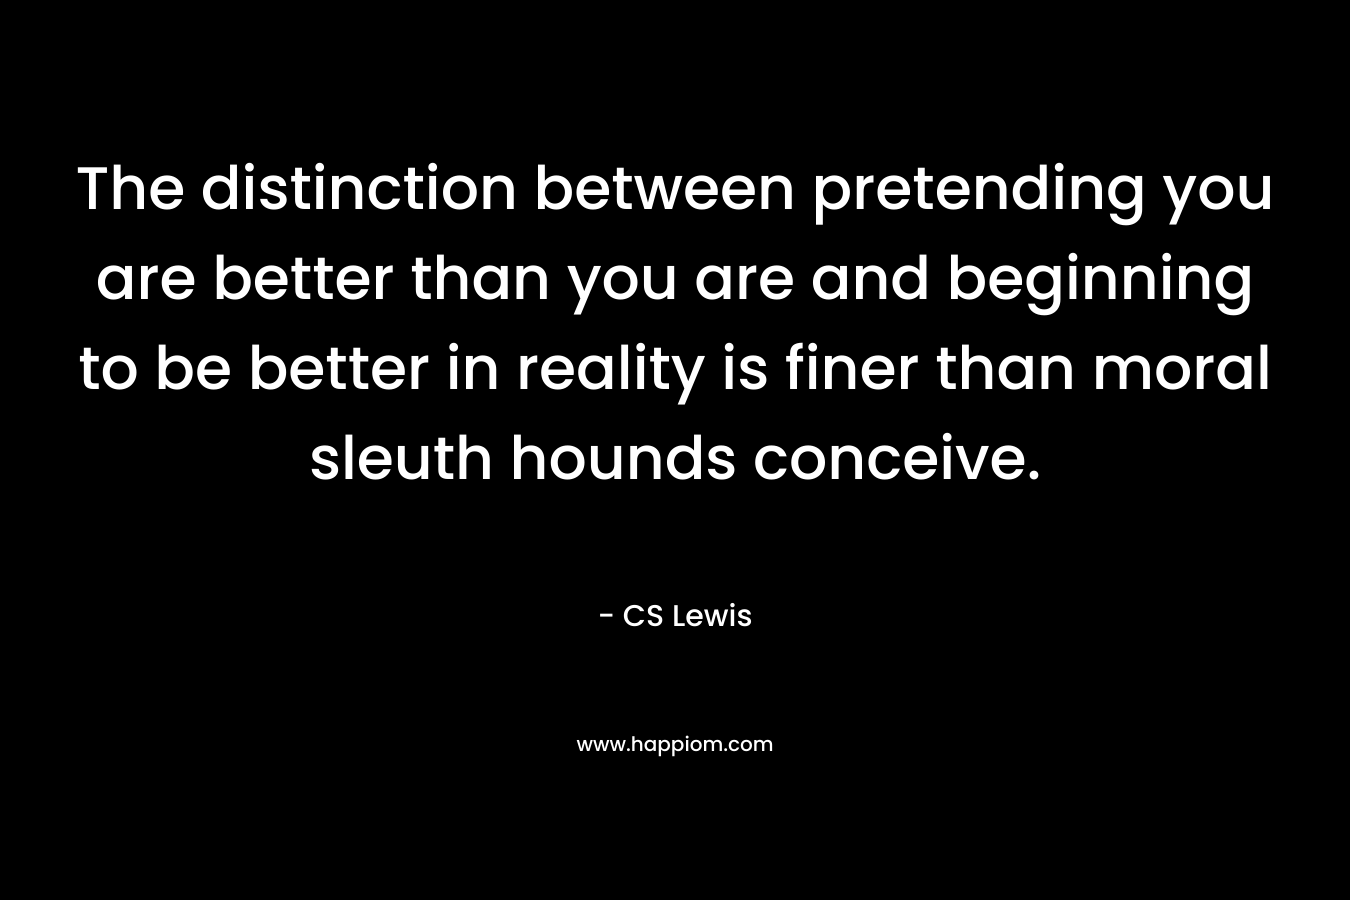 The distinction between pretending you are better than you are and beginning to be better in reality is finer than moral sleuth hounds conceive. – CS Lewis